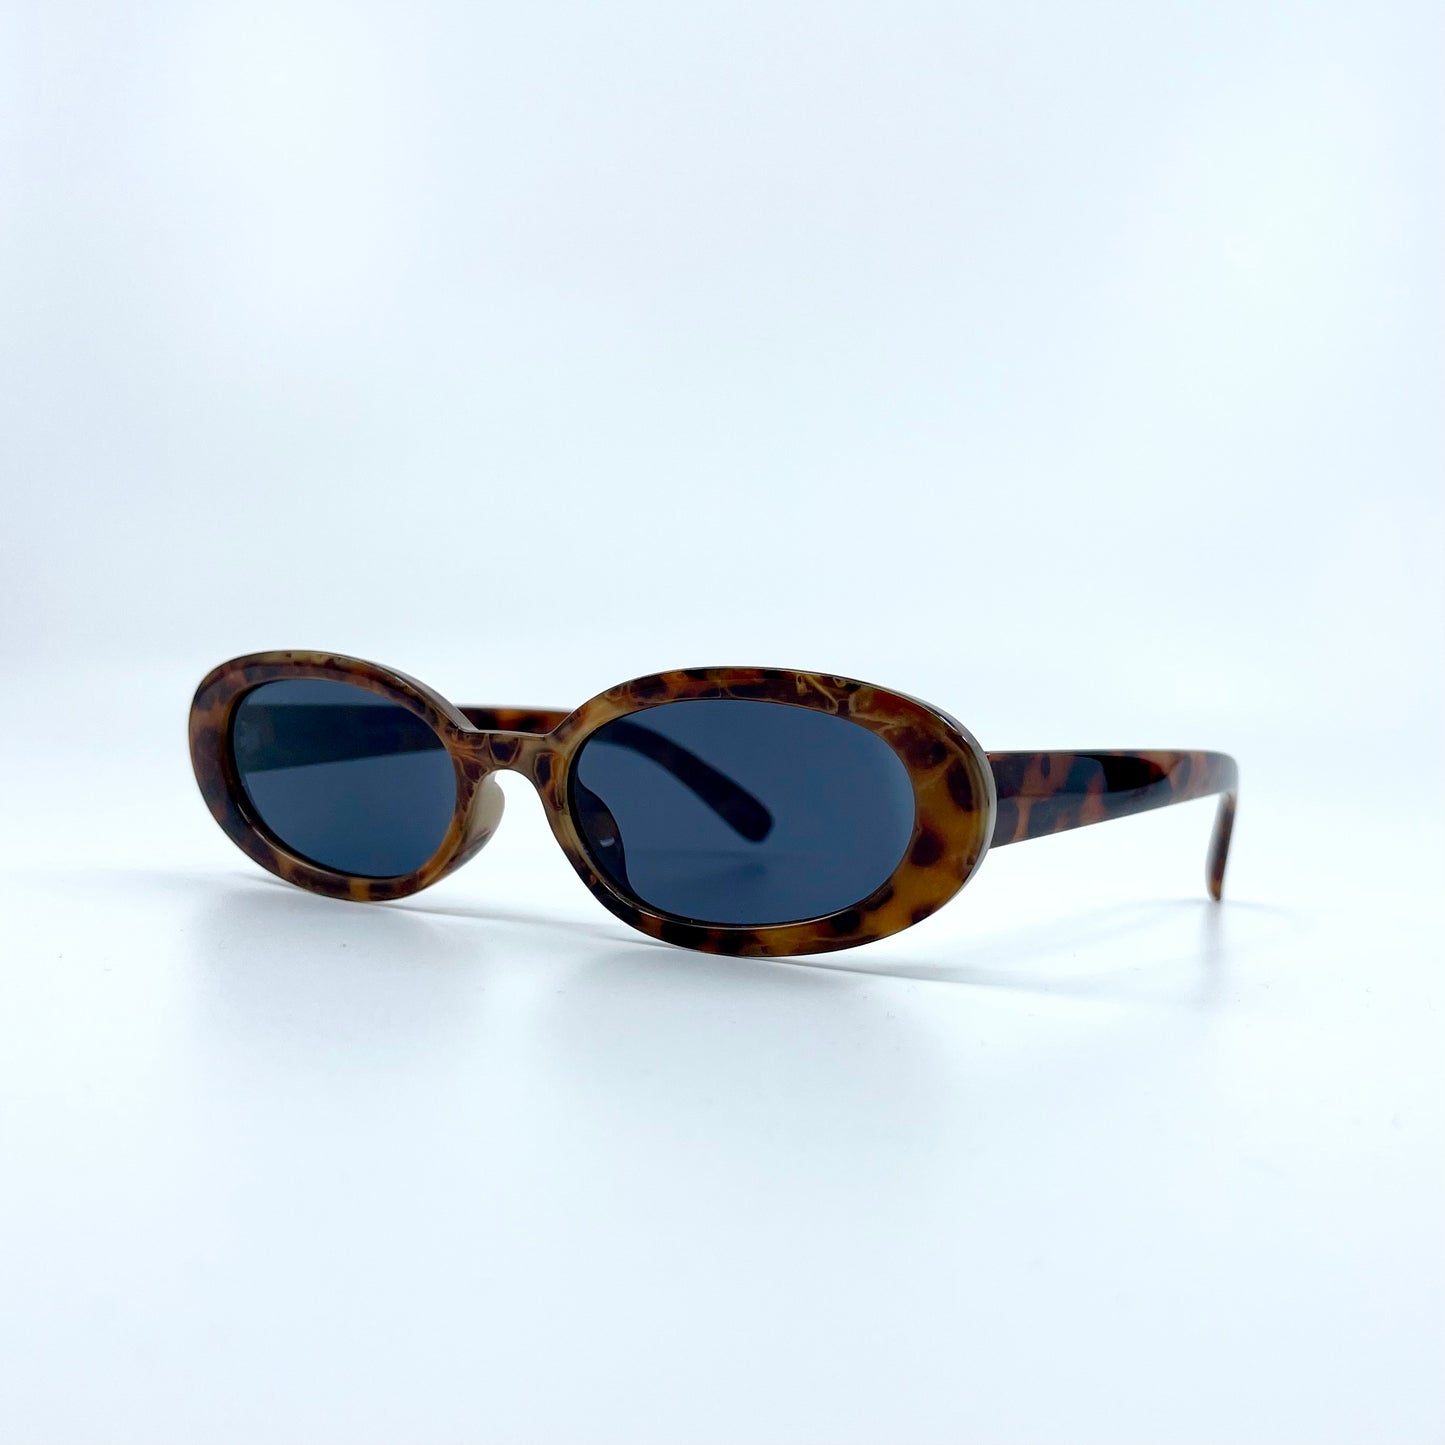 “Downtown” Oval Sunglasses